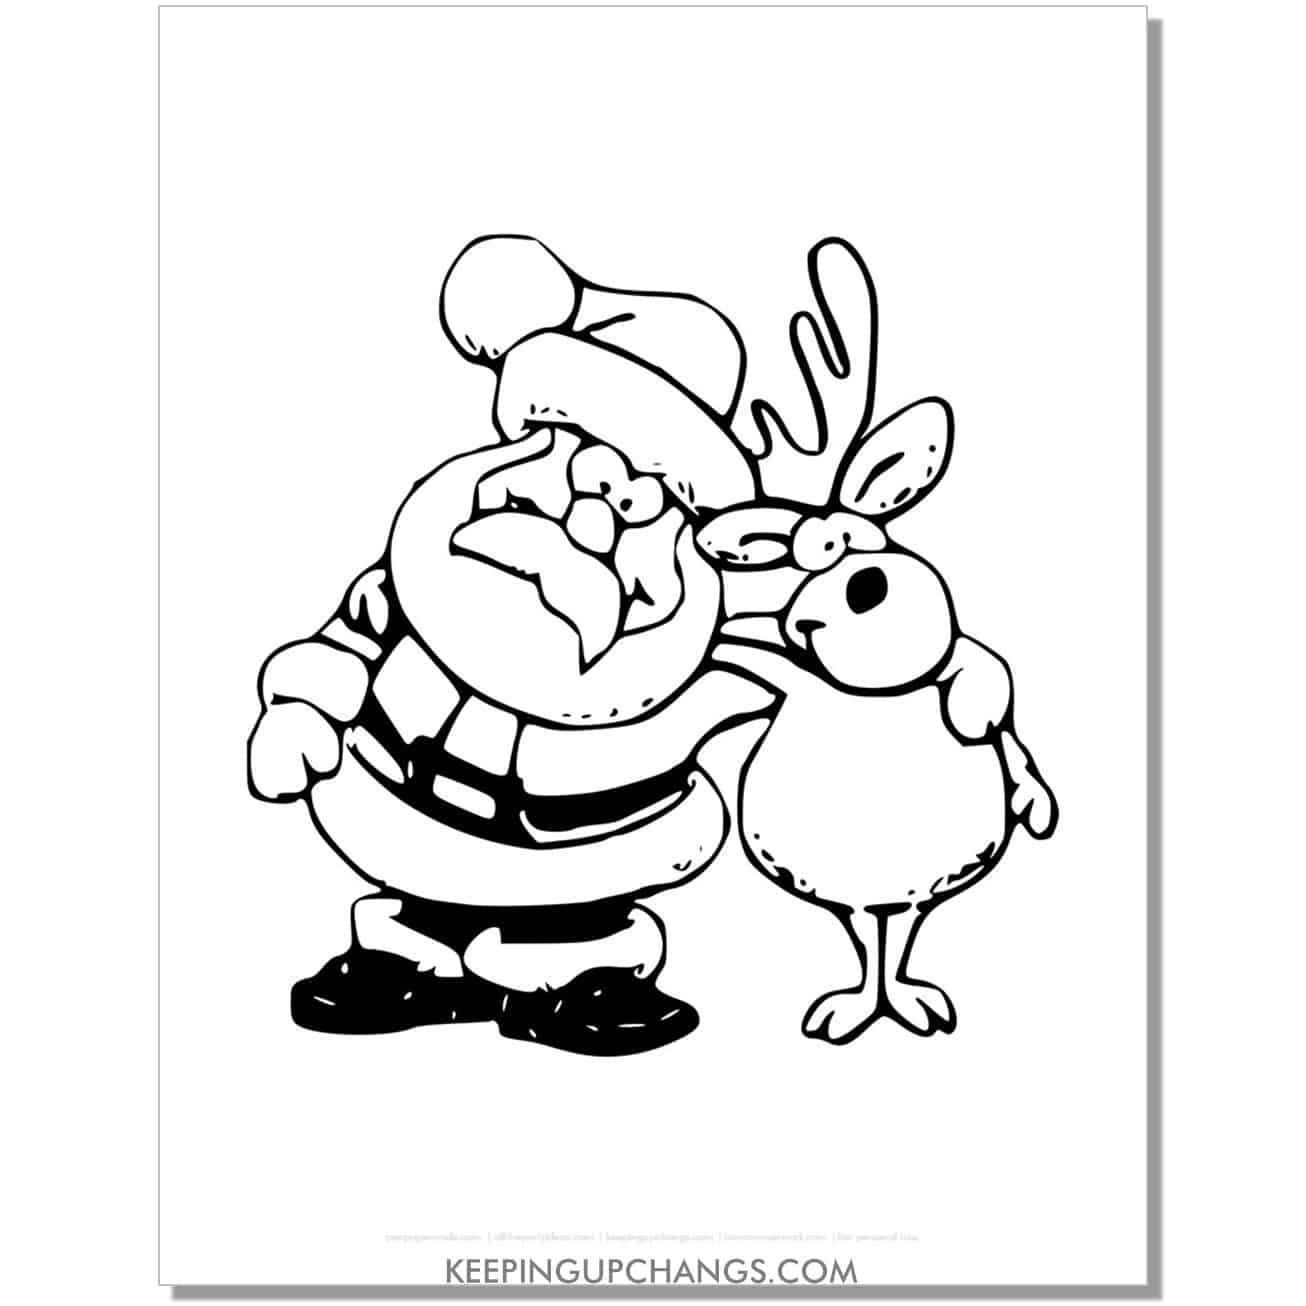 Free reindeer coloring page sheets most popular printables